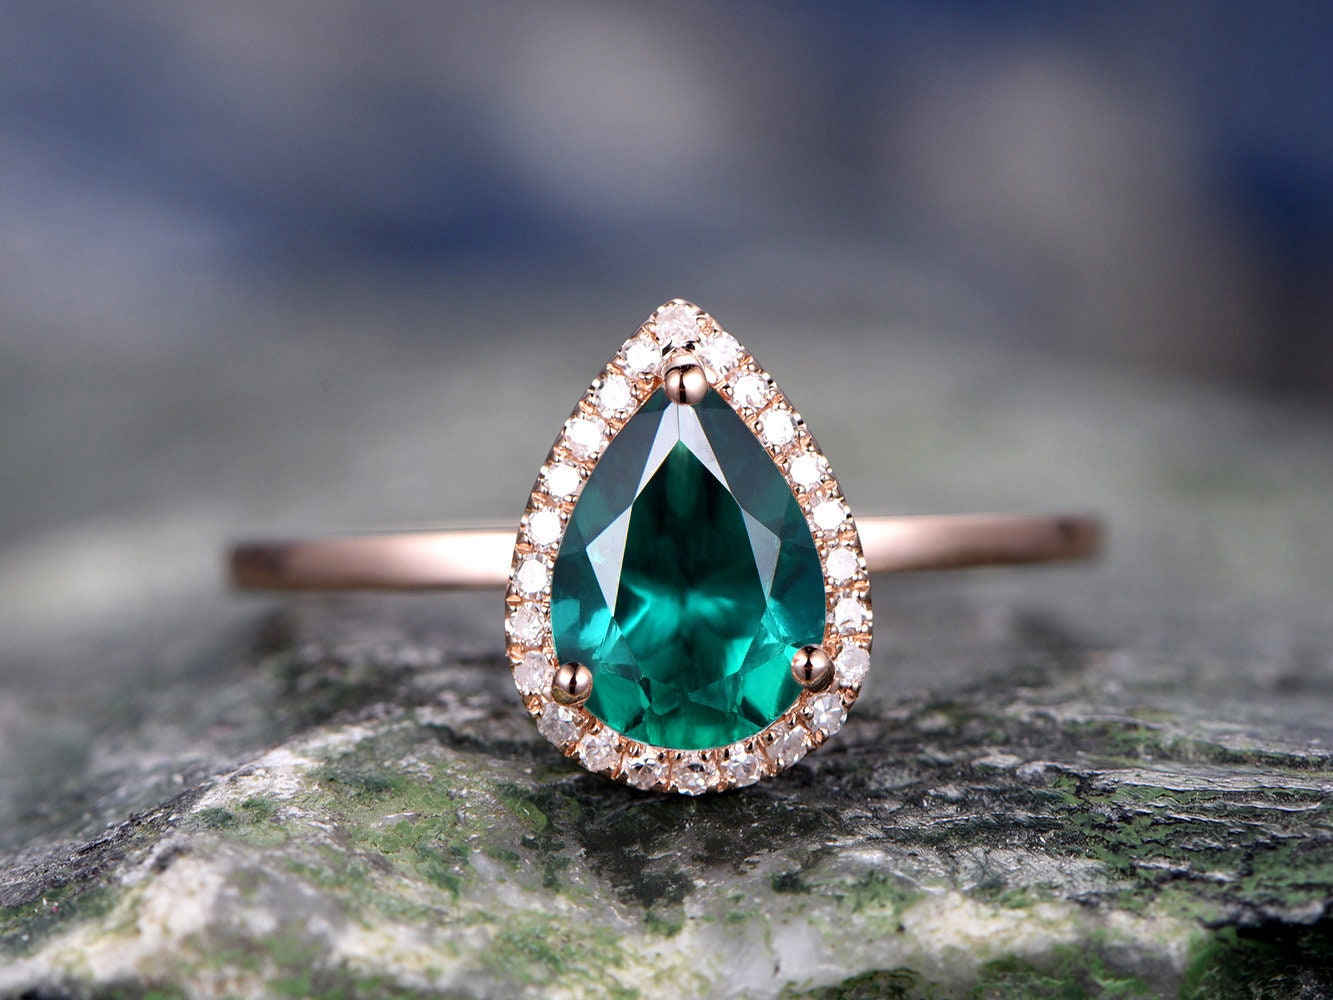 Floral Round Emerald Diamond Engagement Ring in 14k Yellow Gold